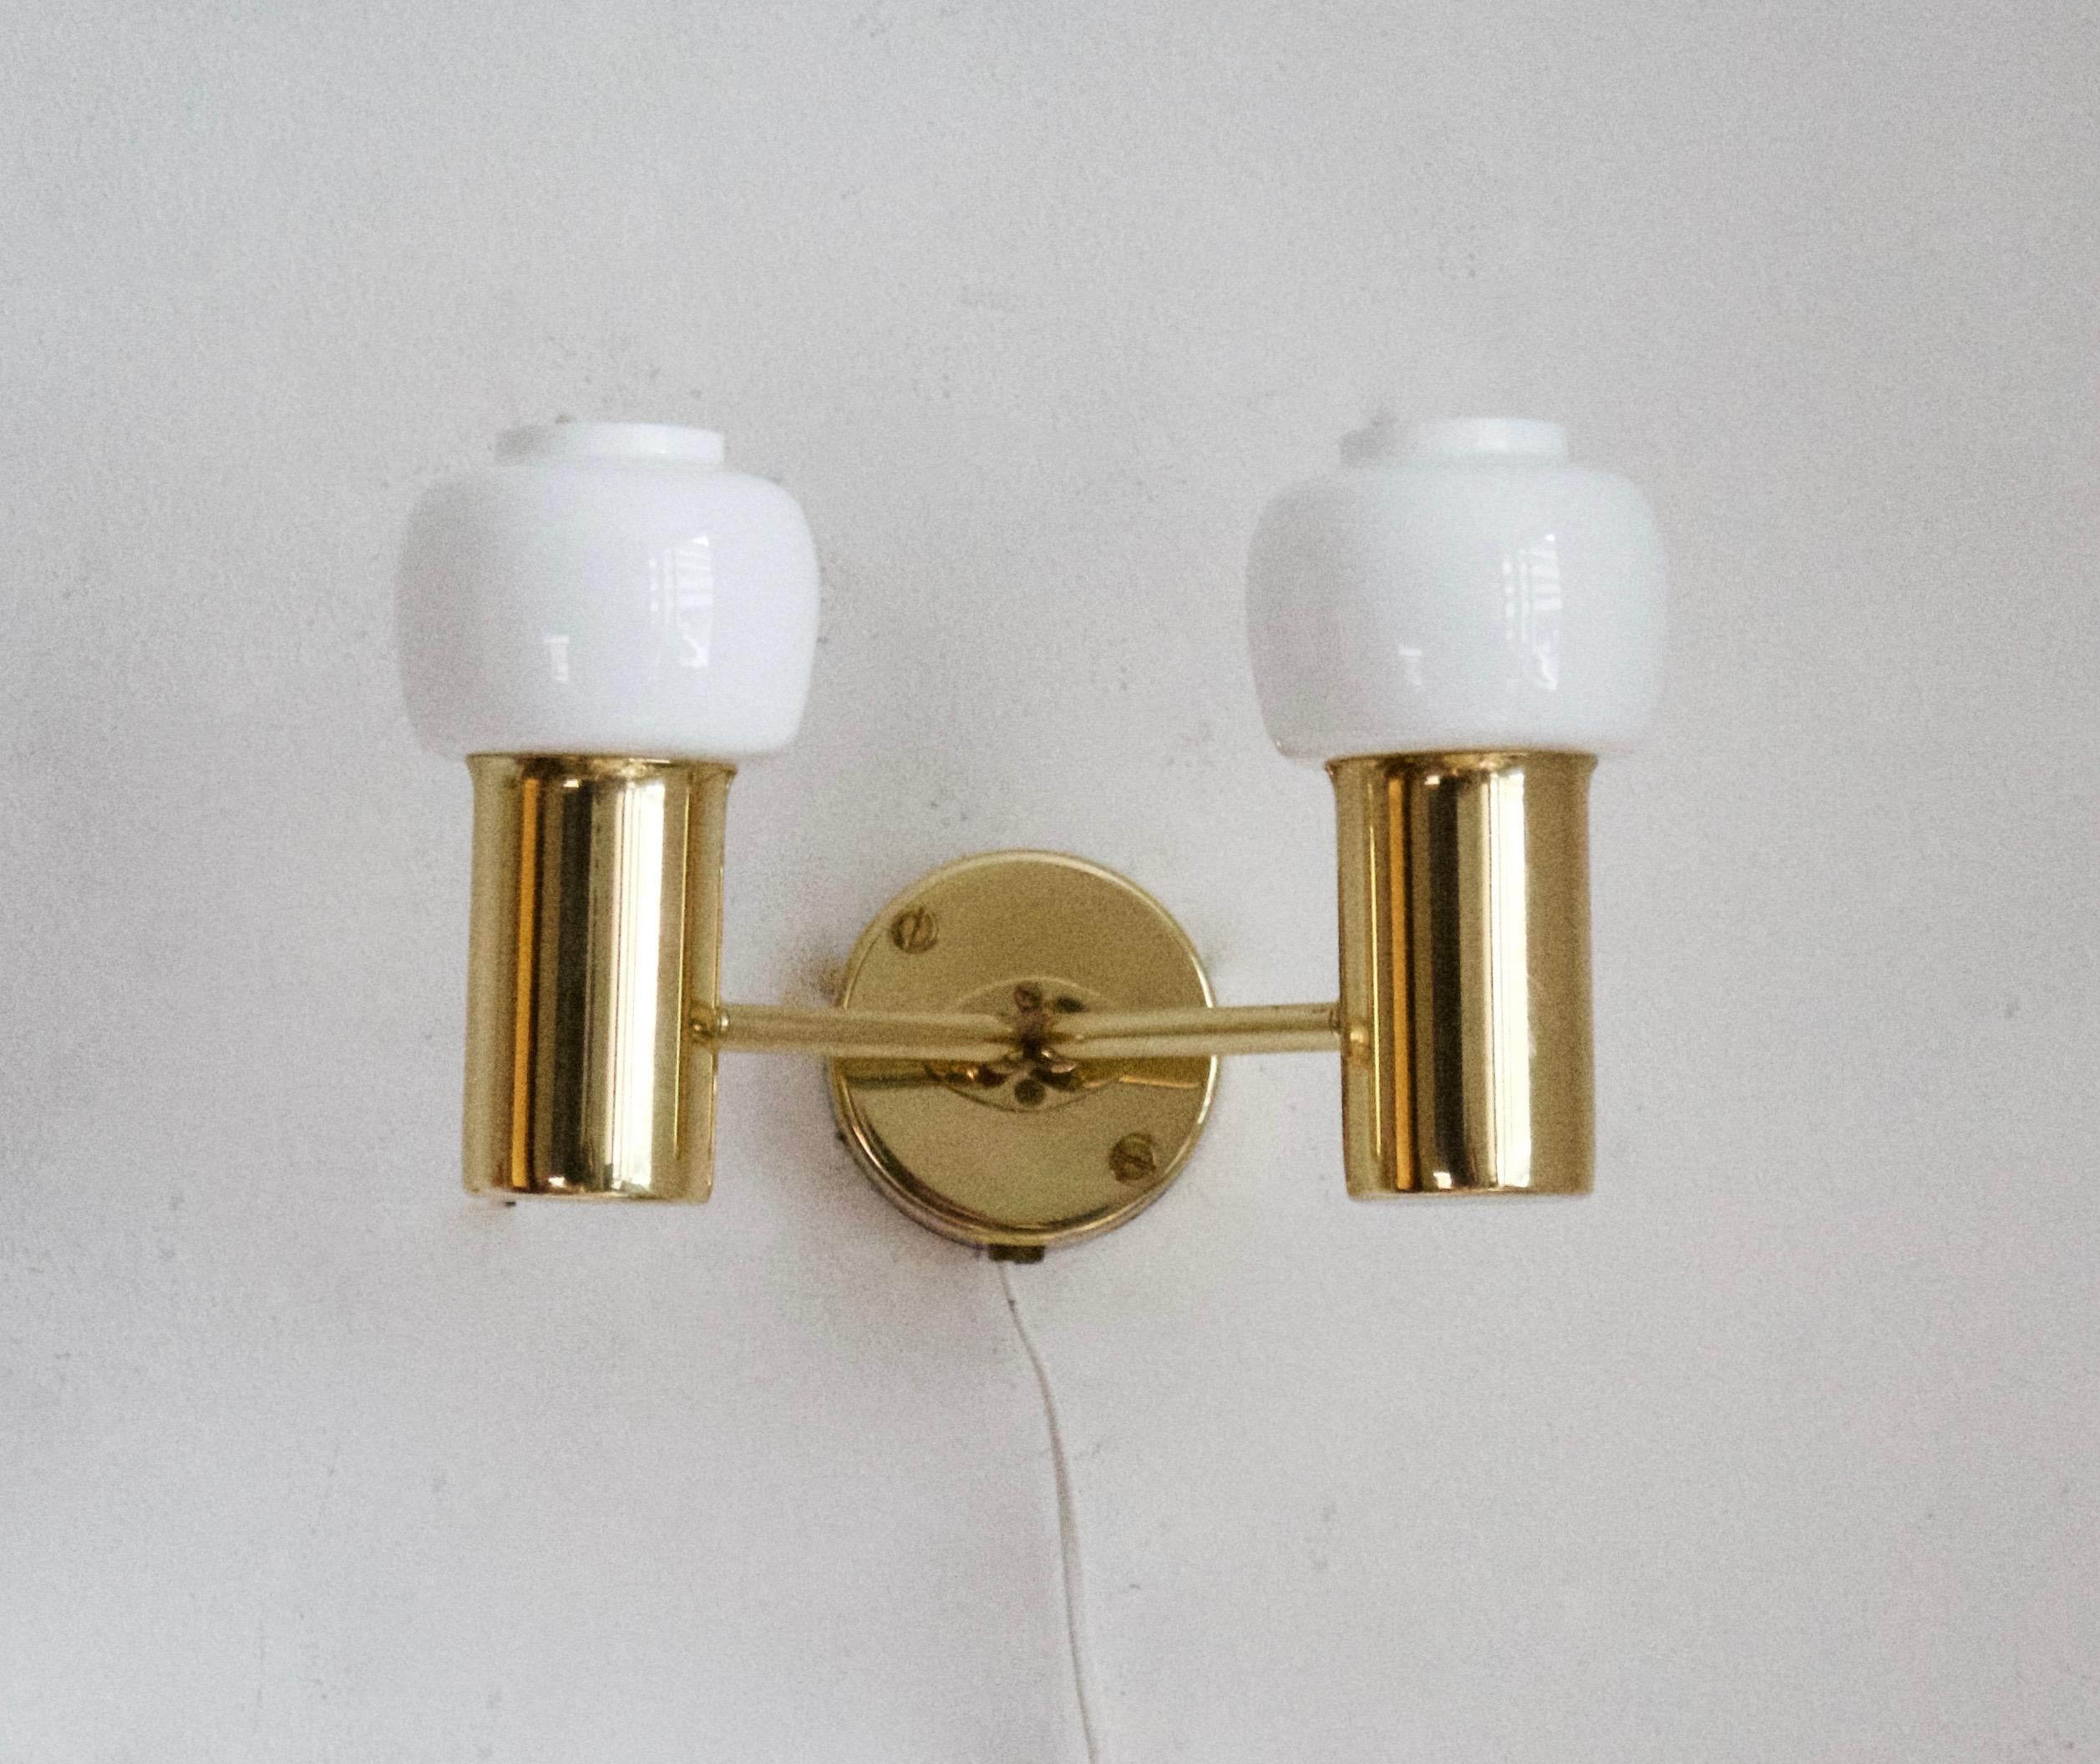 A pair of two-armed wall lights, designed by Hans-Agne Jakobsson for his own firm in Markaryd, Sweden. c. 1970s. Labeled.